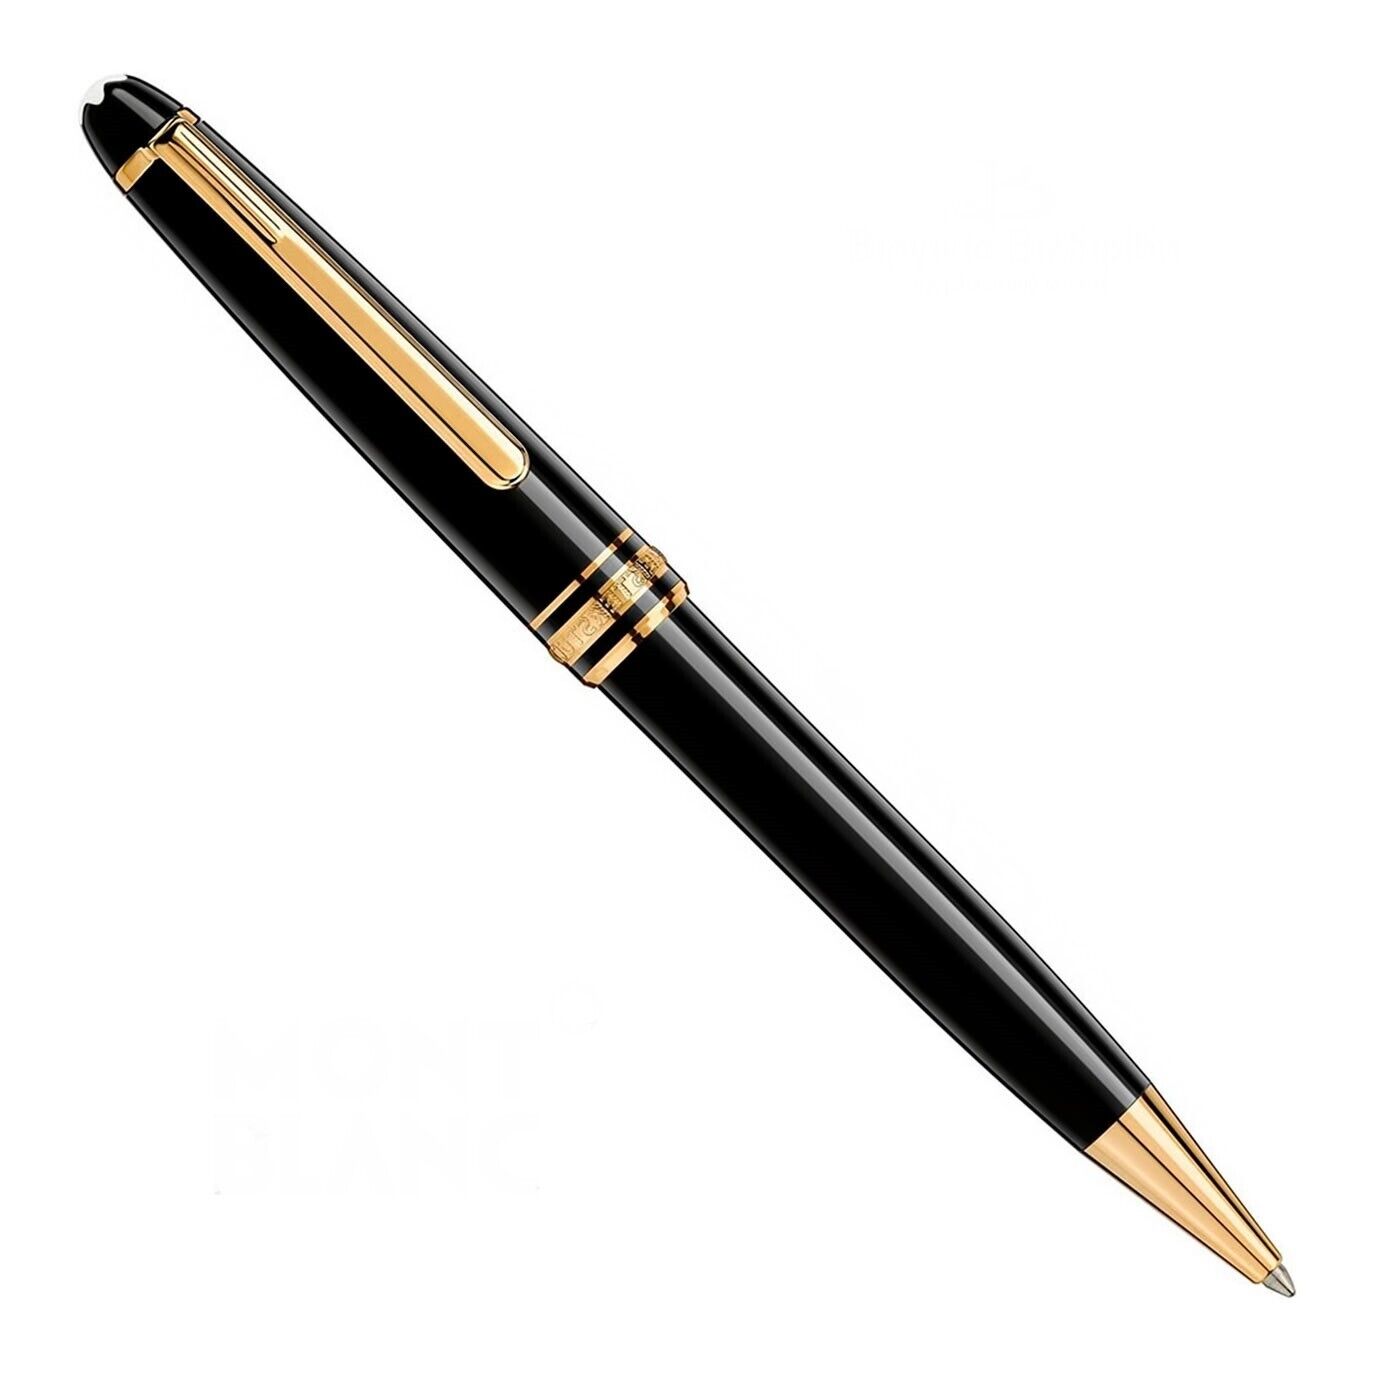 Montblanc Meisterstück Gold-Coated Ballpoint Pen Cyber Monday Sales one day only